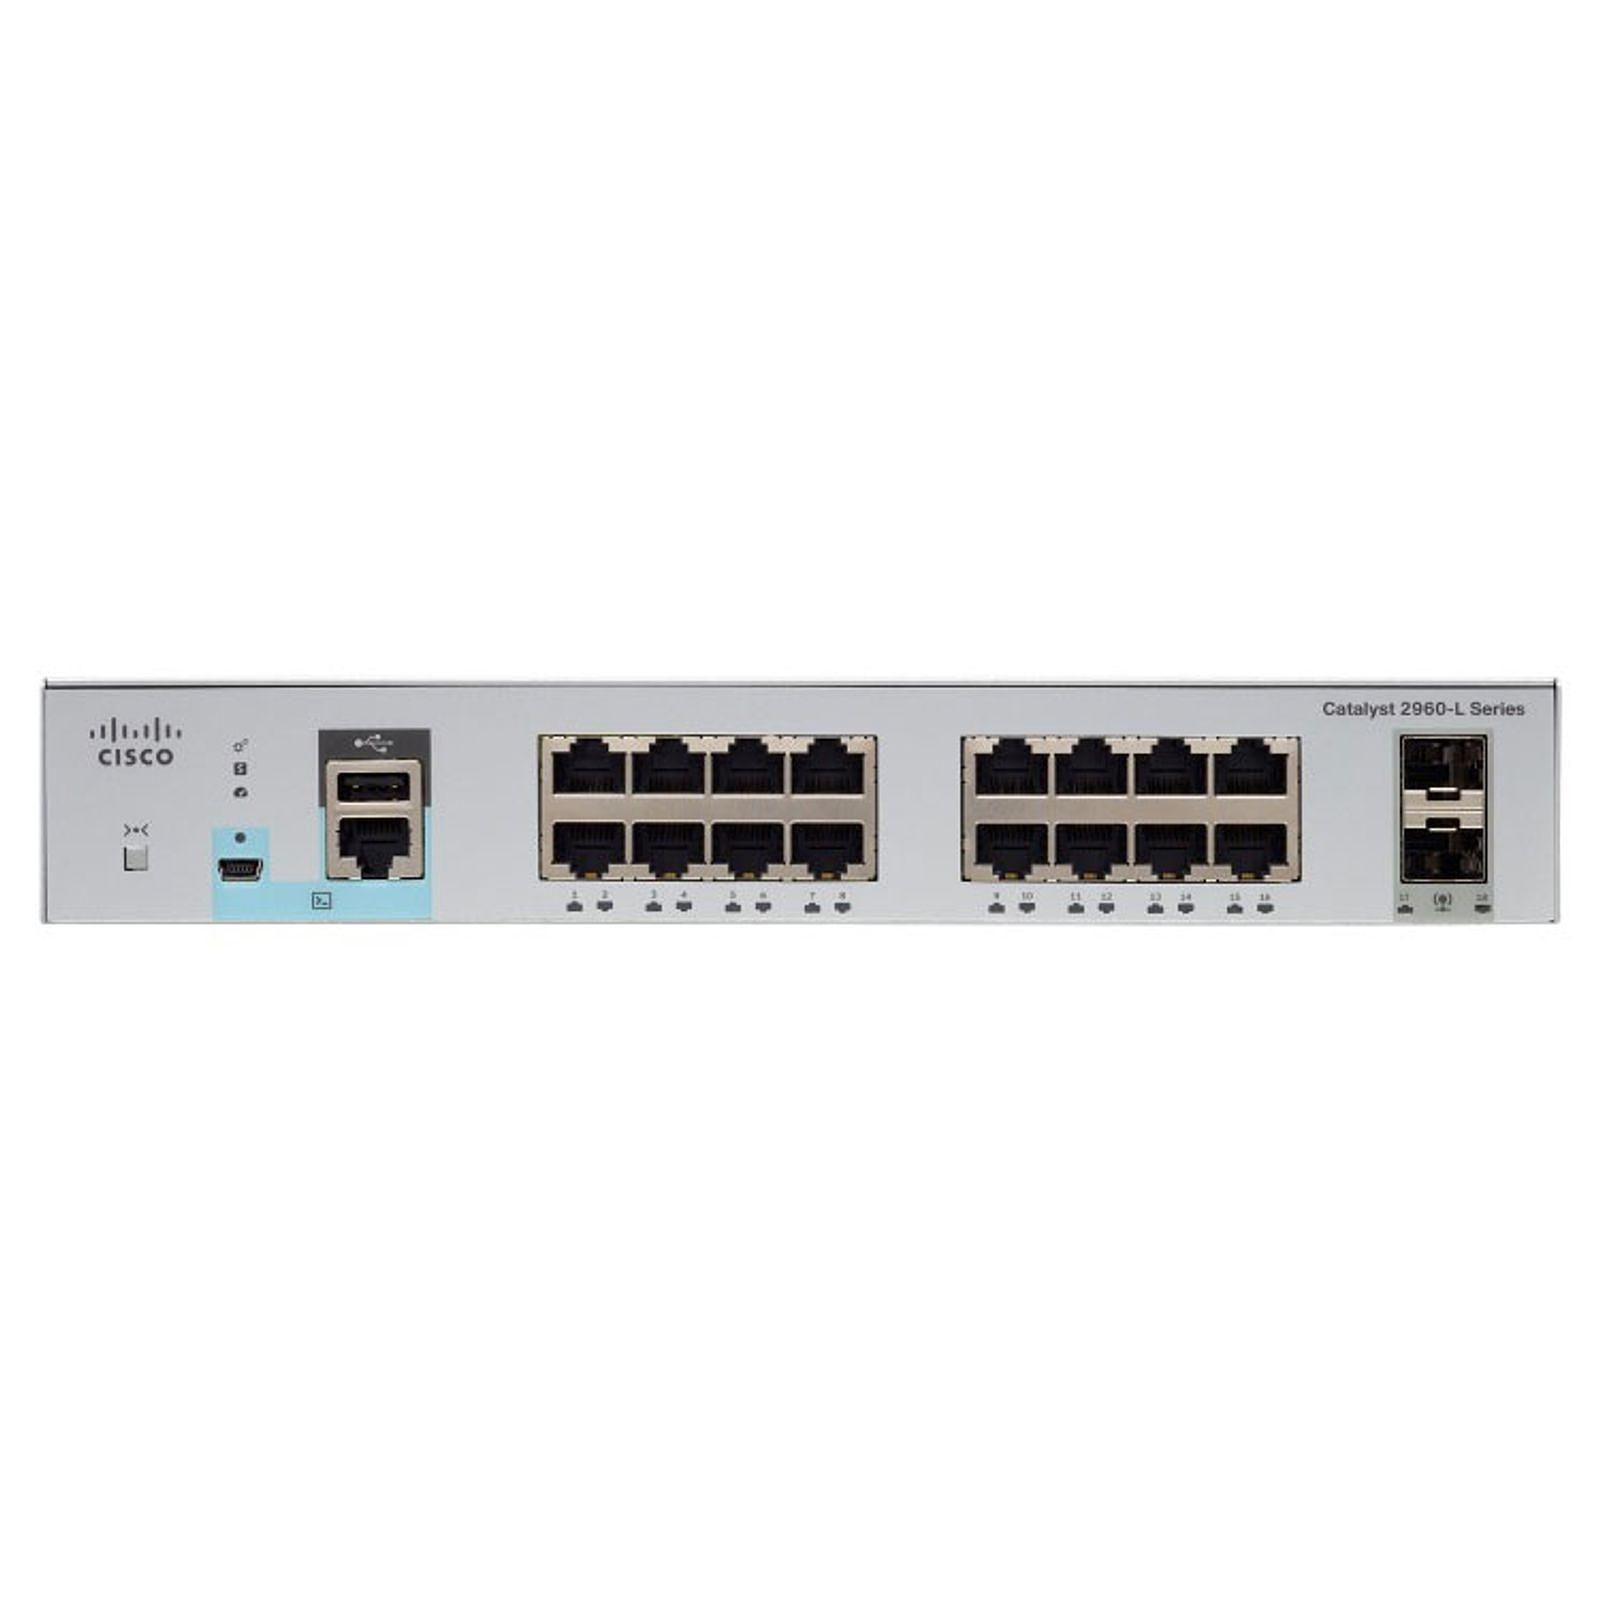 Cisco Catalyst WS-C2960L-16PS-LL Switch PoE+ 16 ports 10/100/1000 Mbps + 2 ports SFP